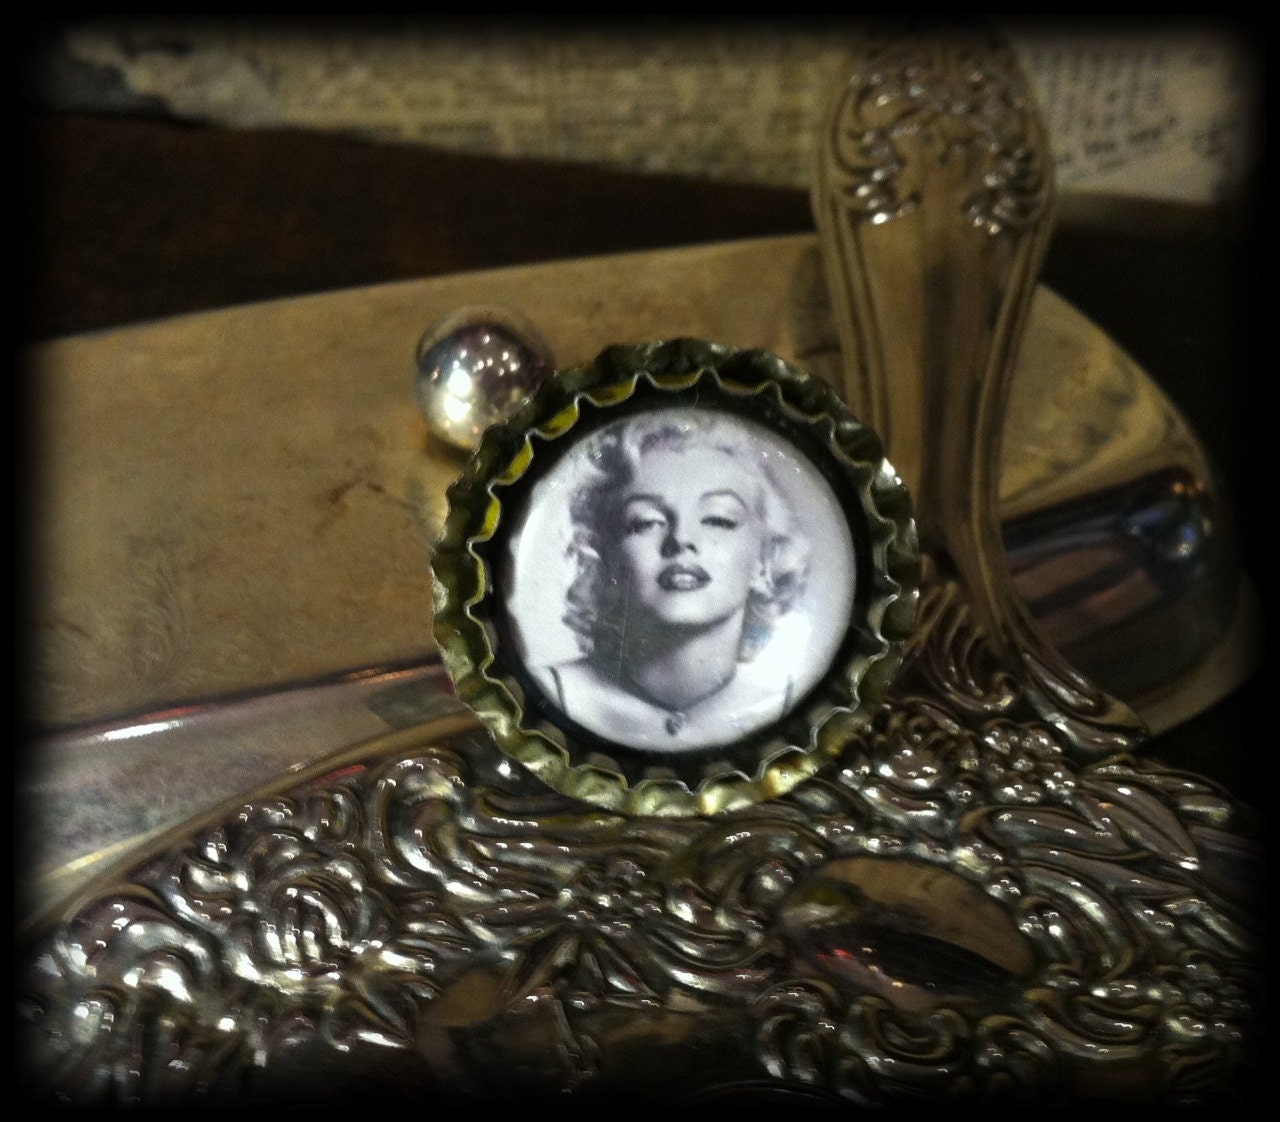 Black and White Marilyn Monroe bottle cap brooch by Wild Card Accoutrements